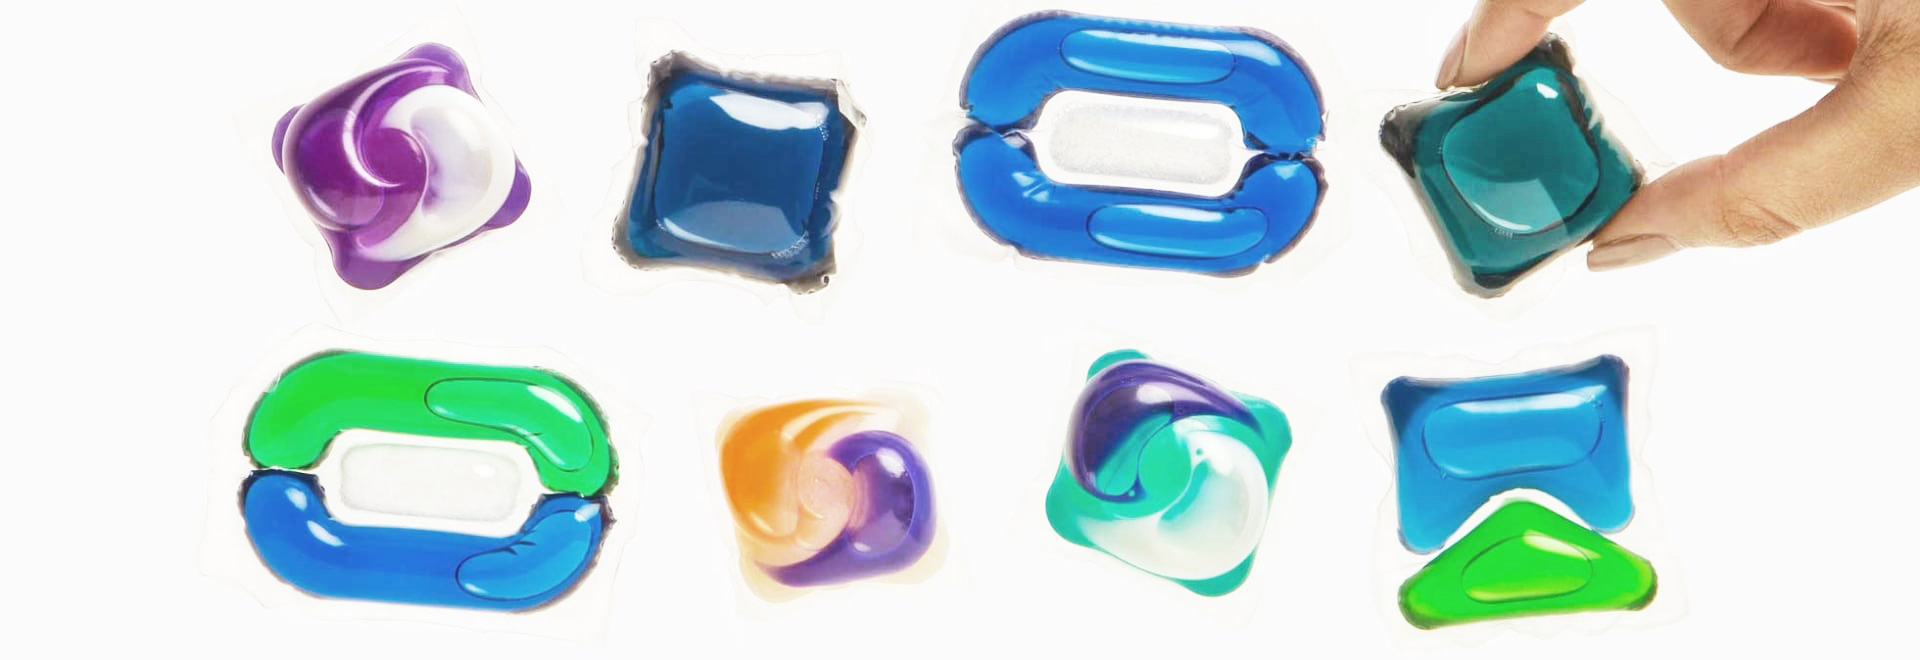 What is laundry detergent pods made of ?